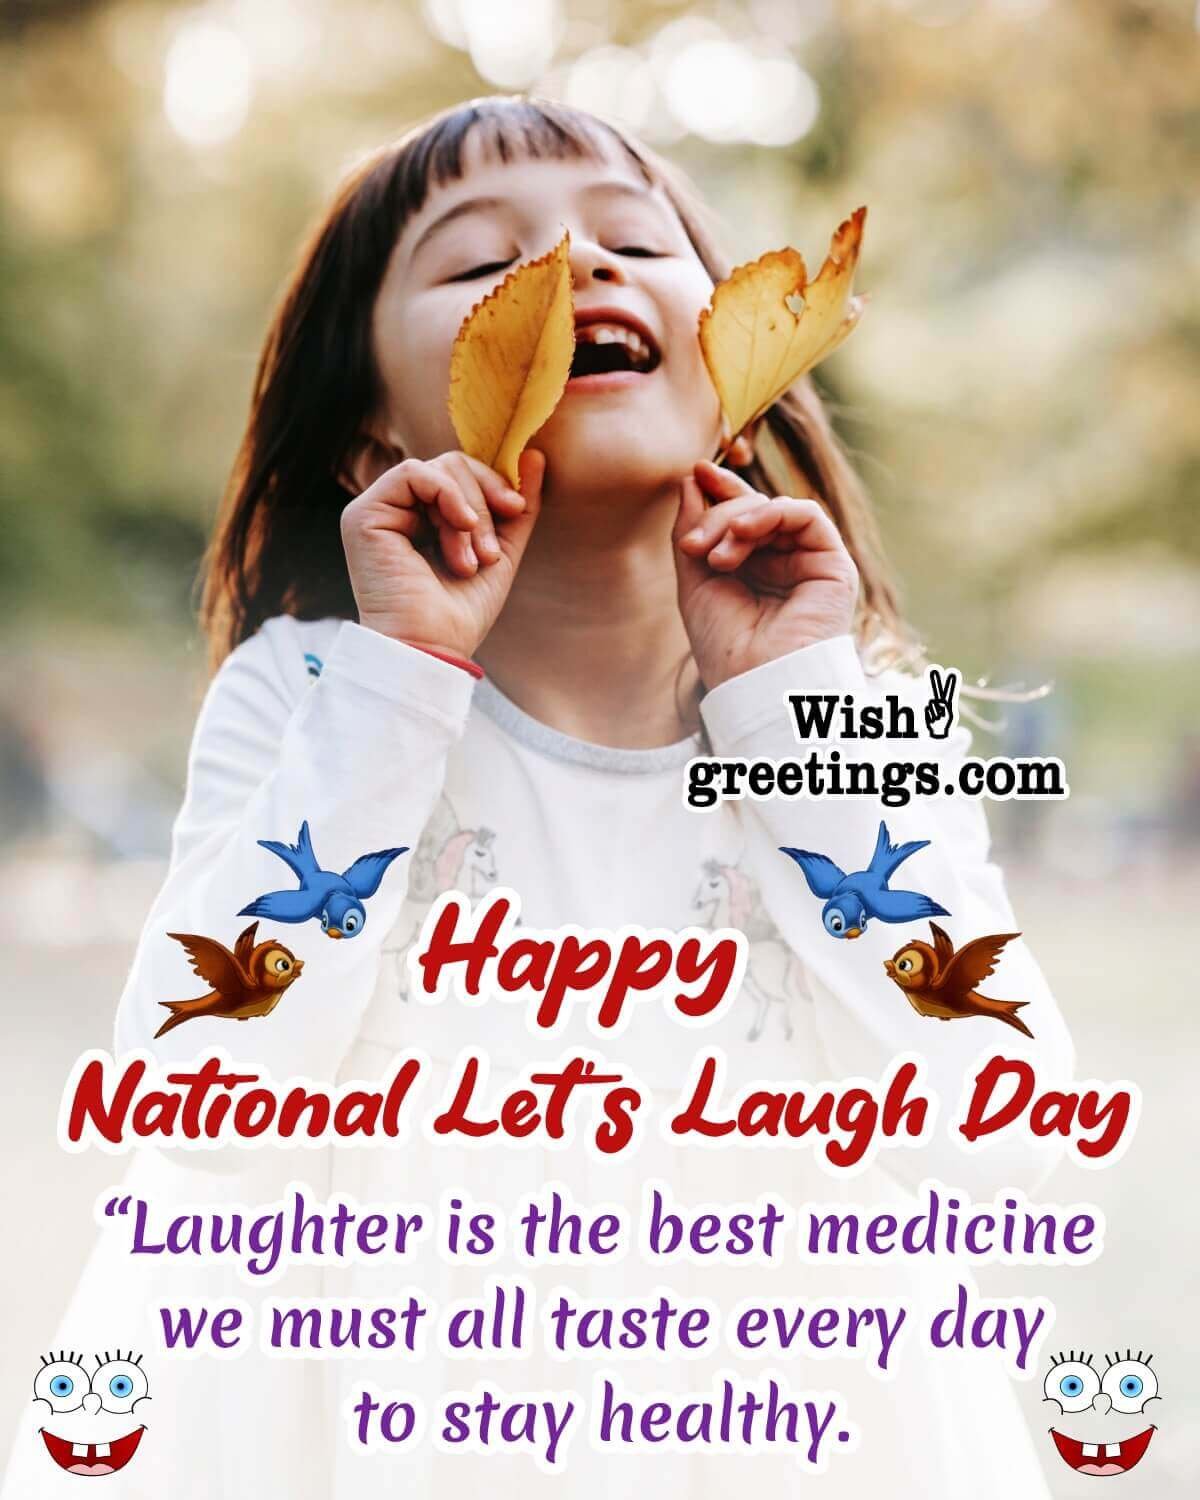 National Let’s Laugh Day Messages Wish Greetings